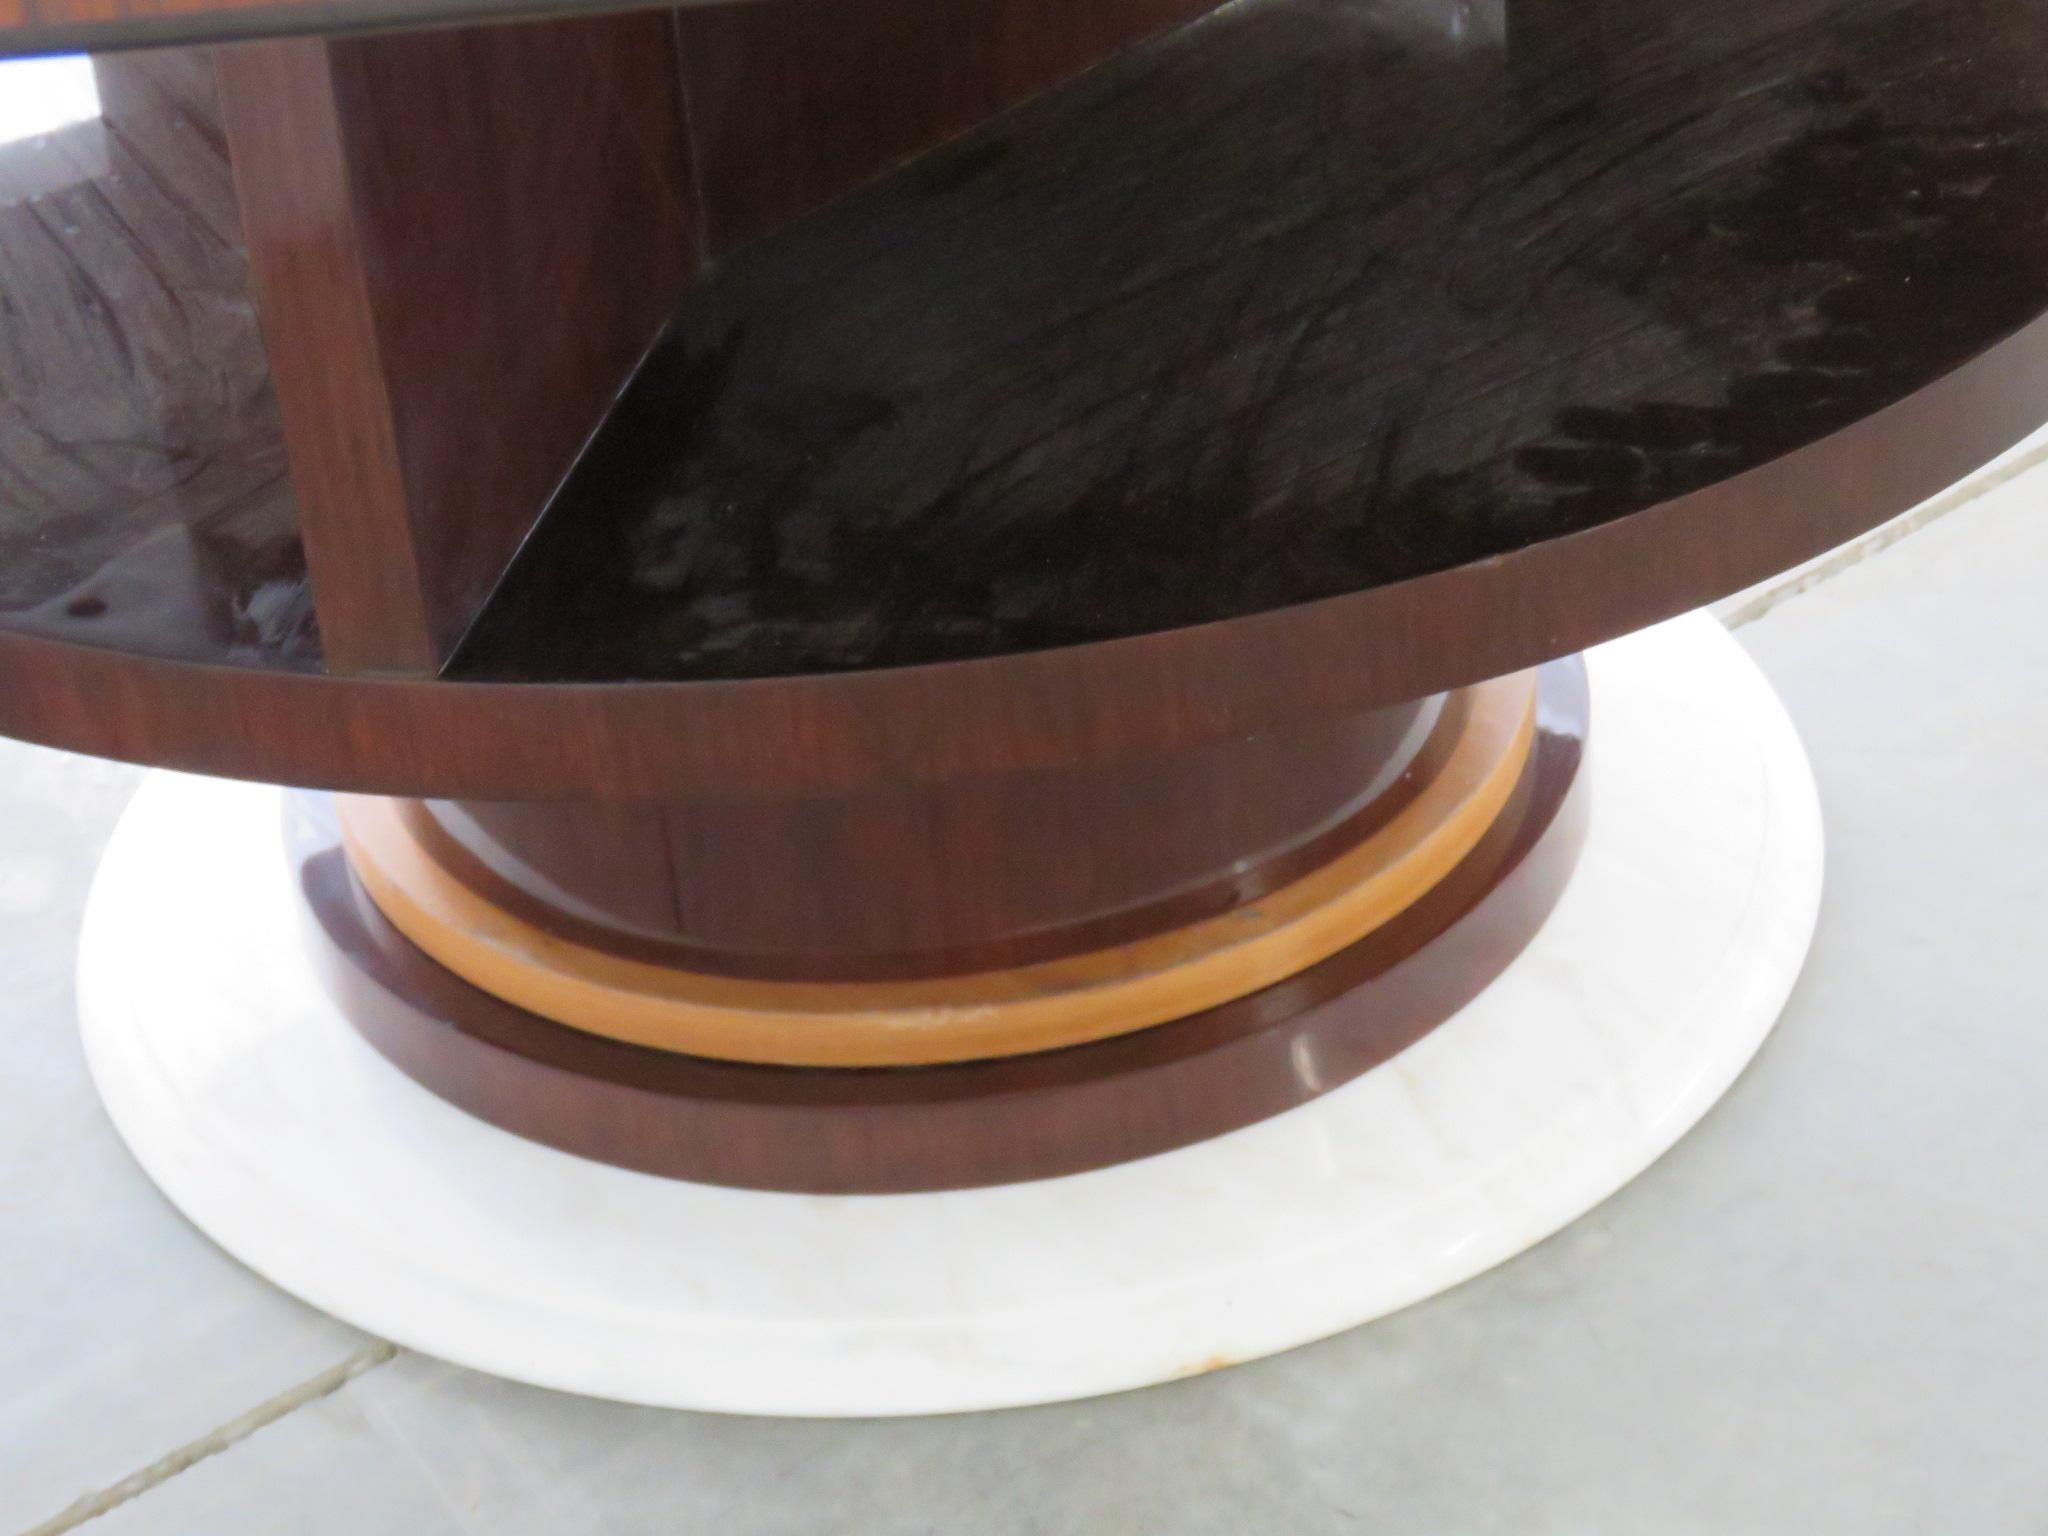 66 round dining table